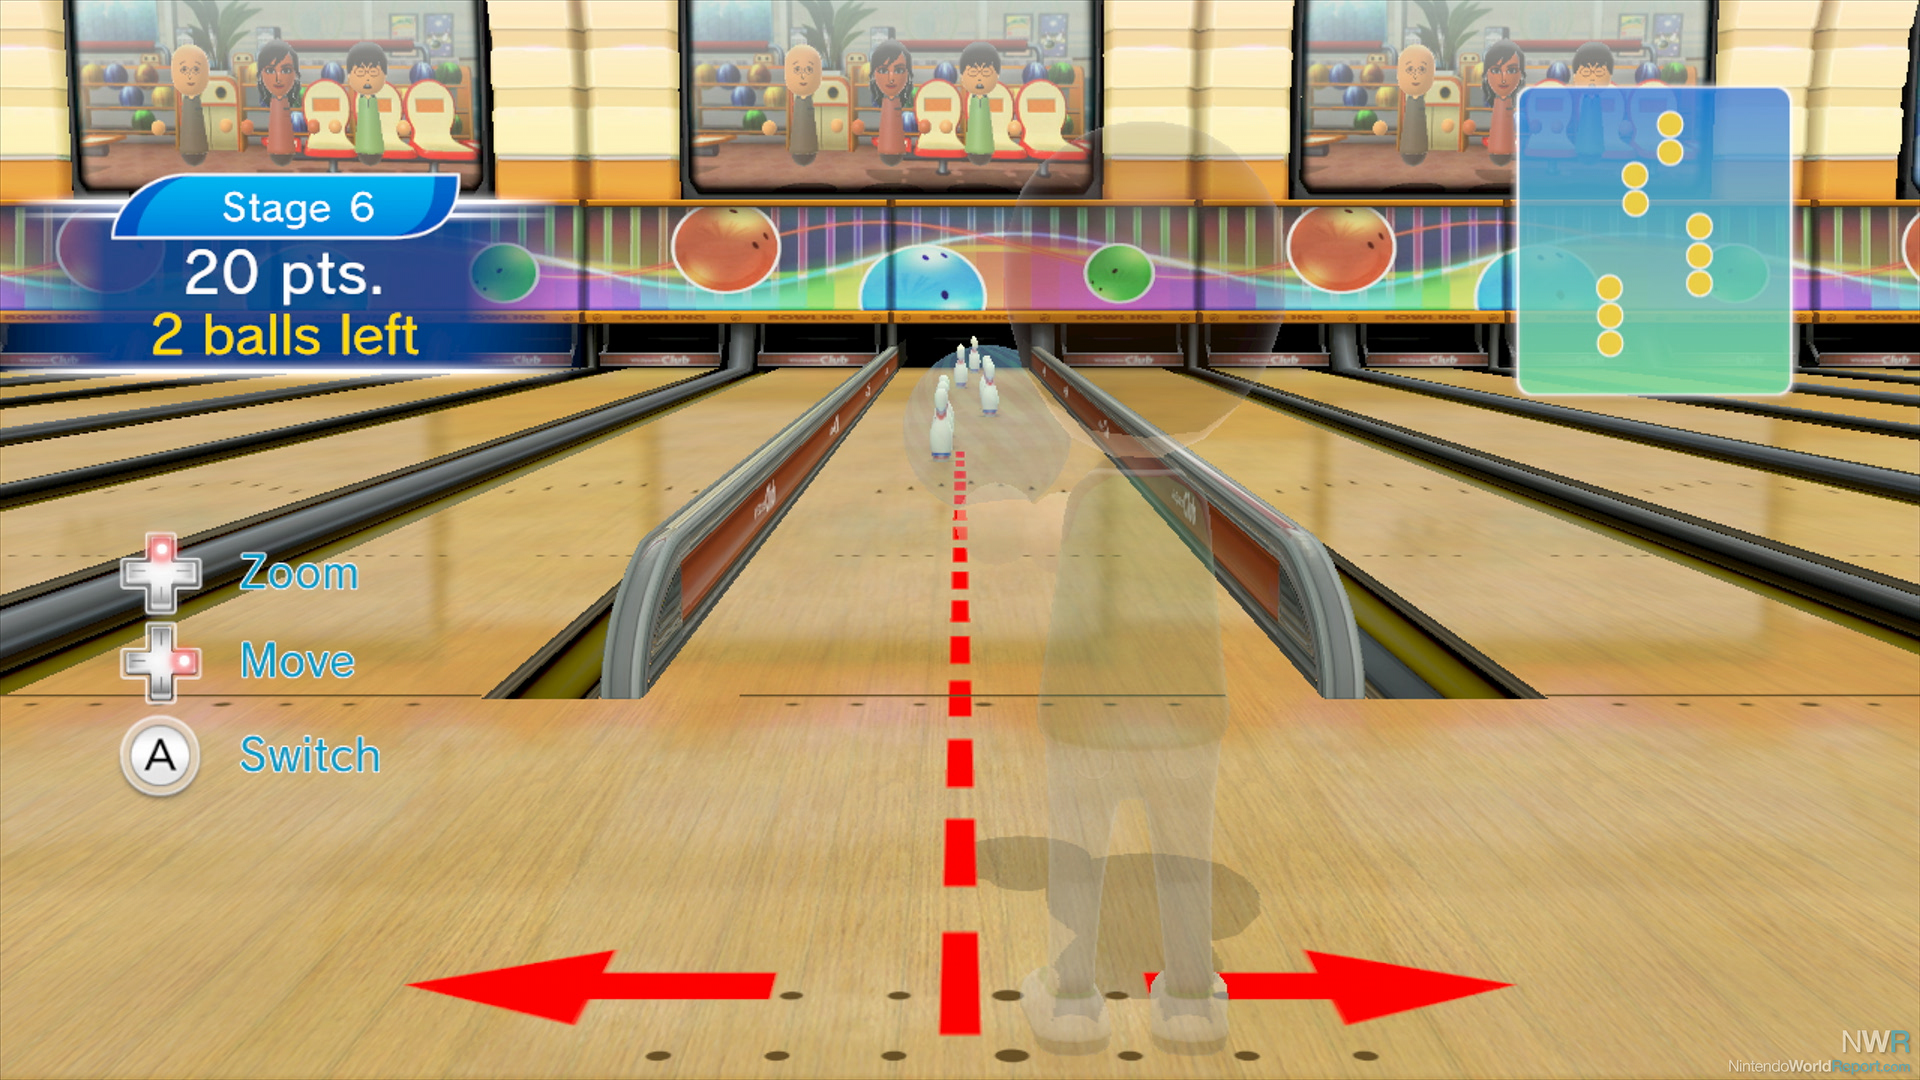 wii bowling game online